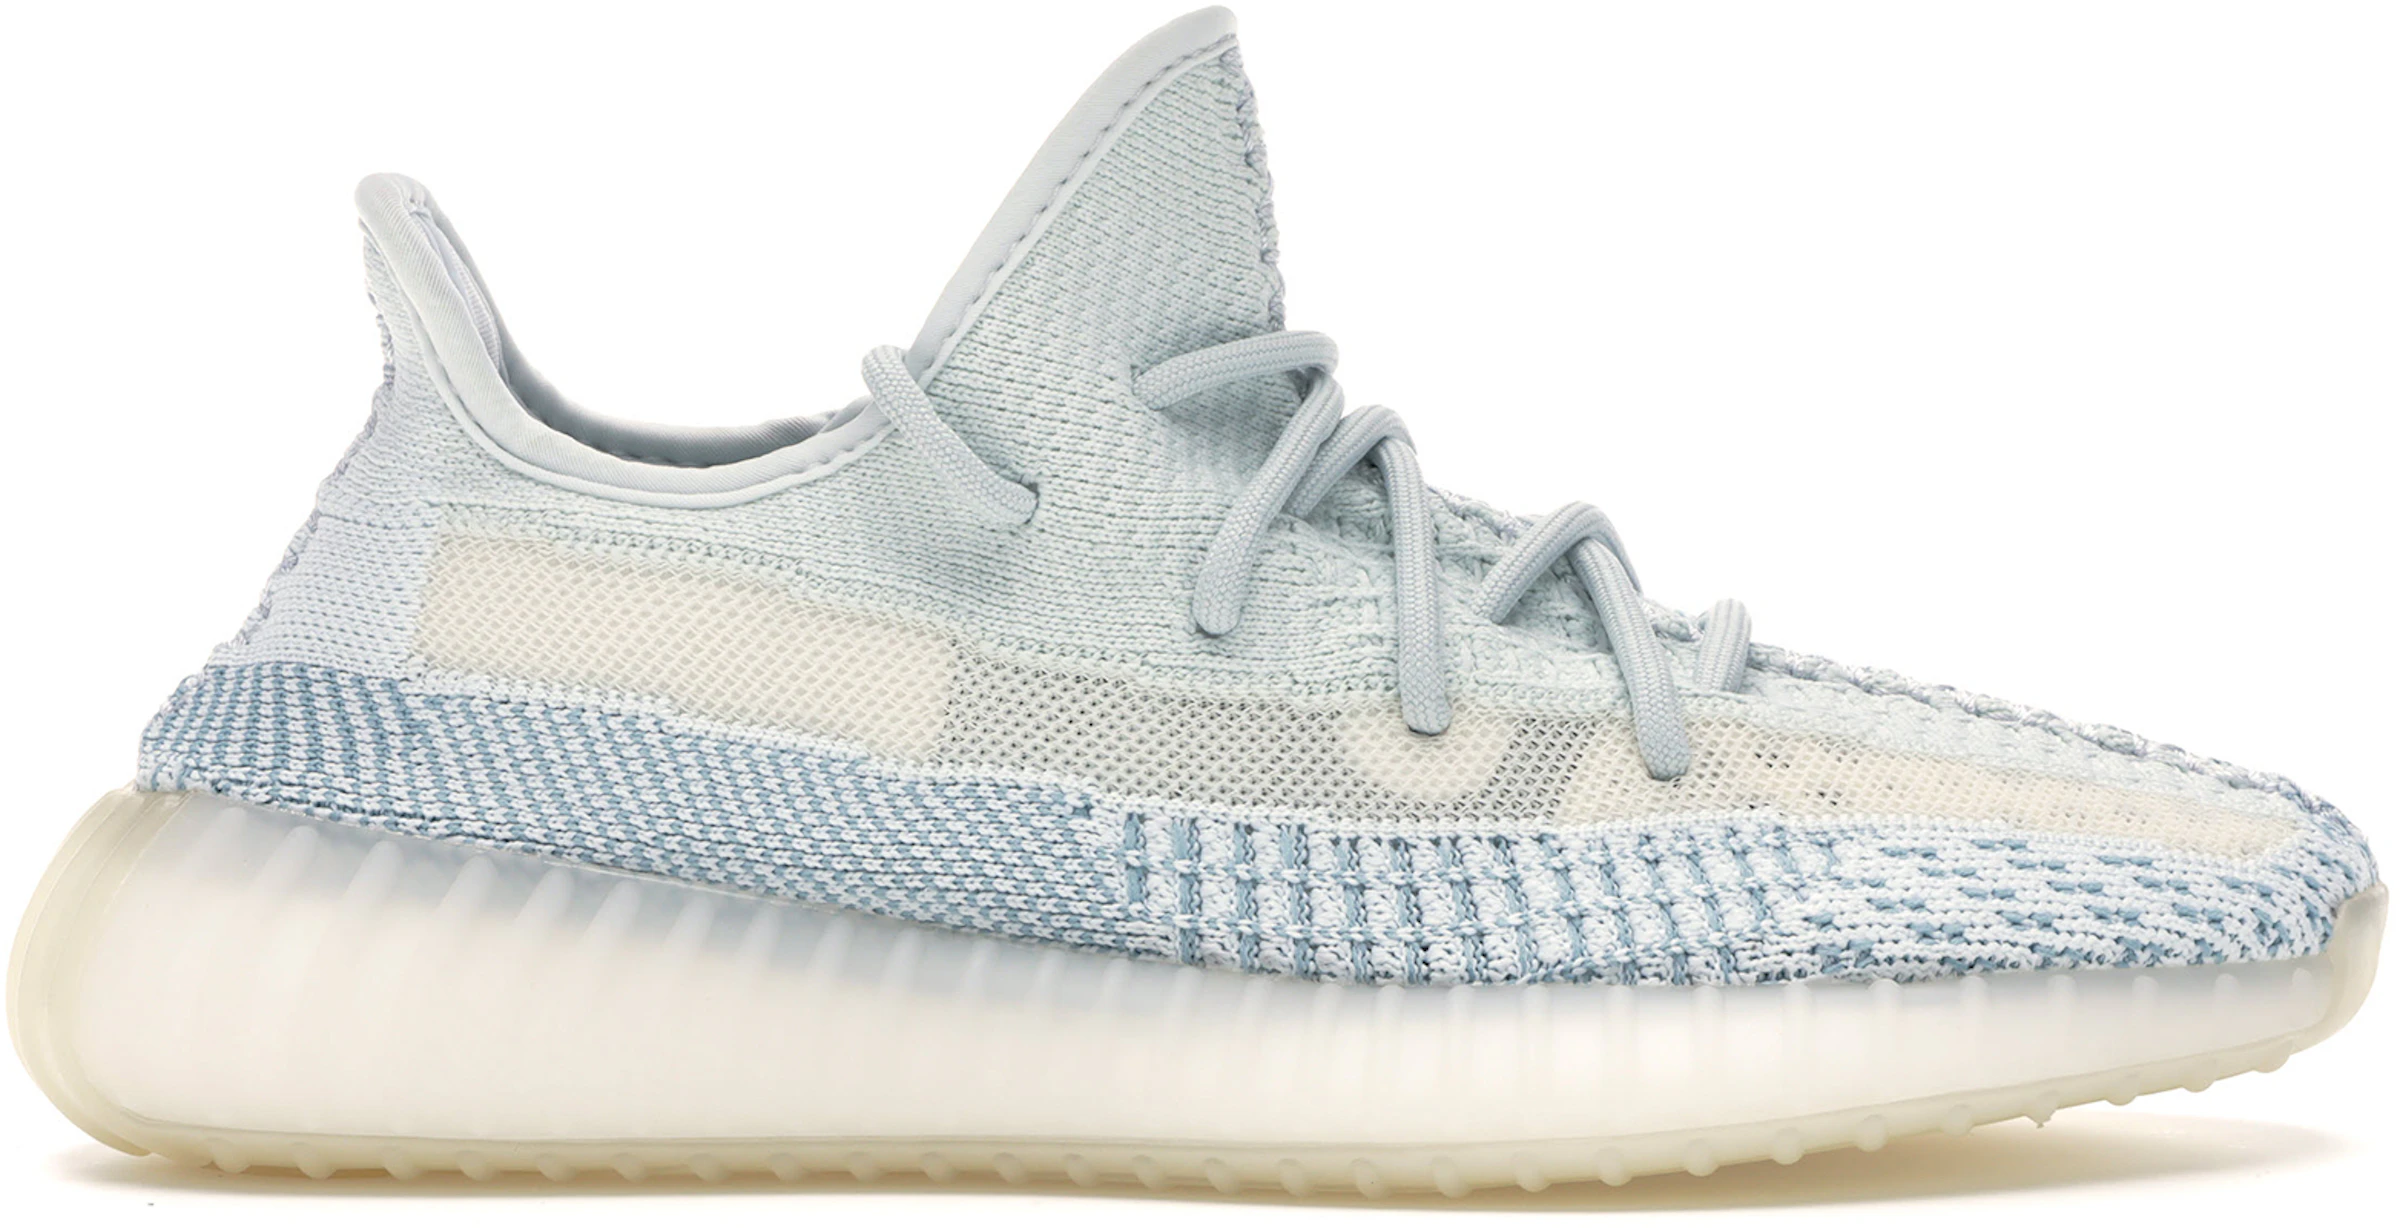 adidas Yeezy Boost 350 V2 Cloud White (Non-Reflective) FW3043 - ES